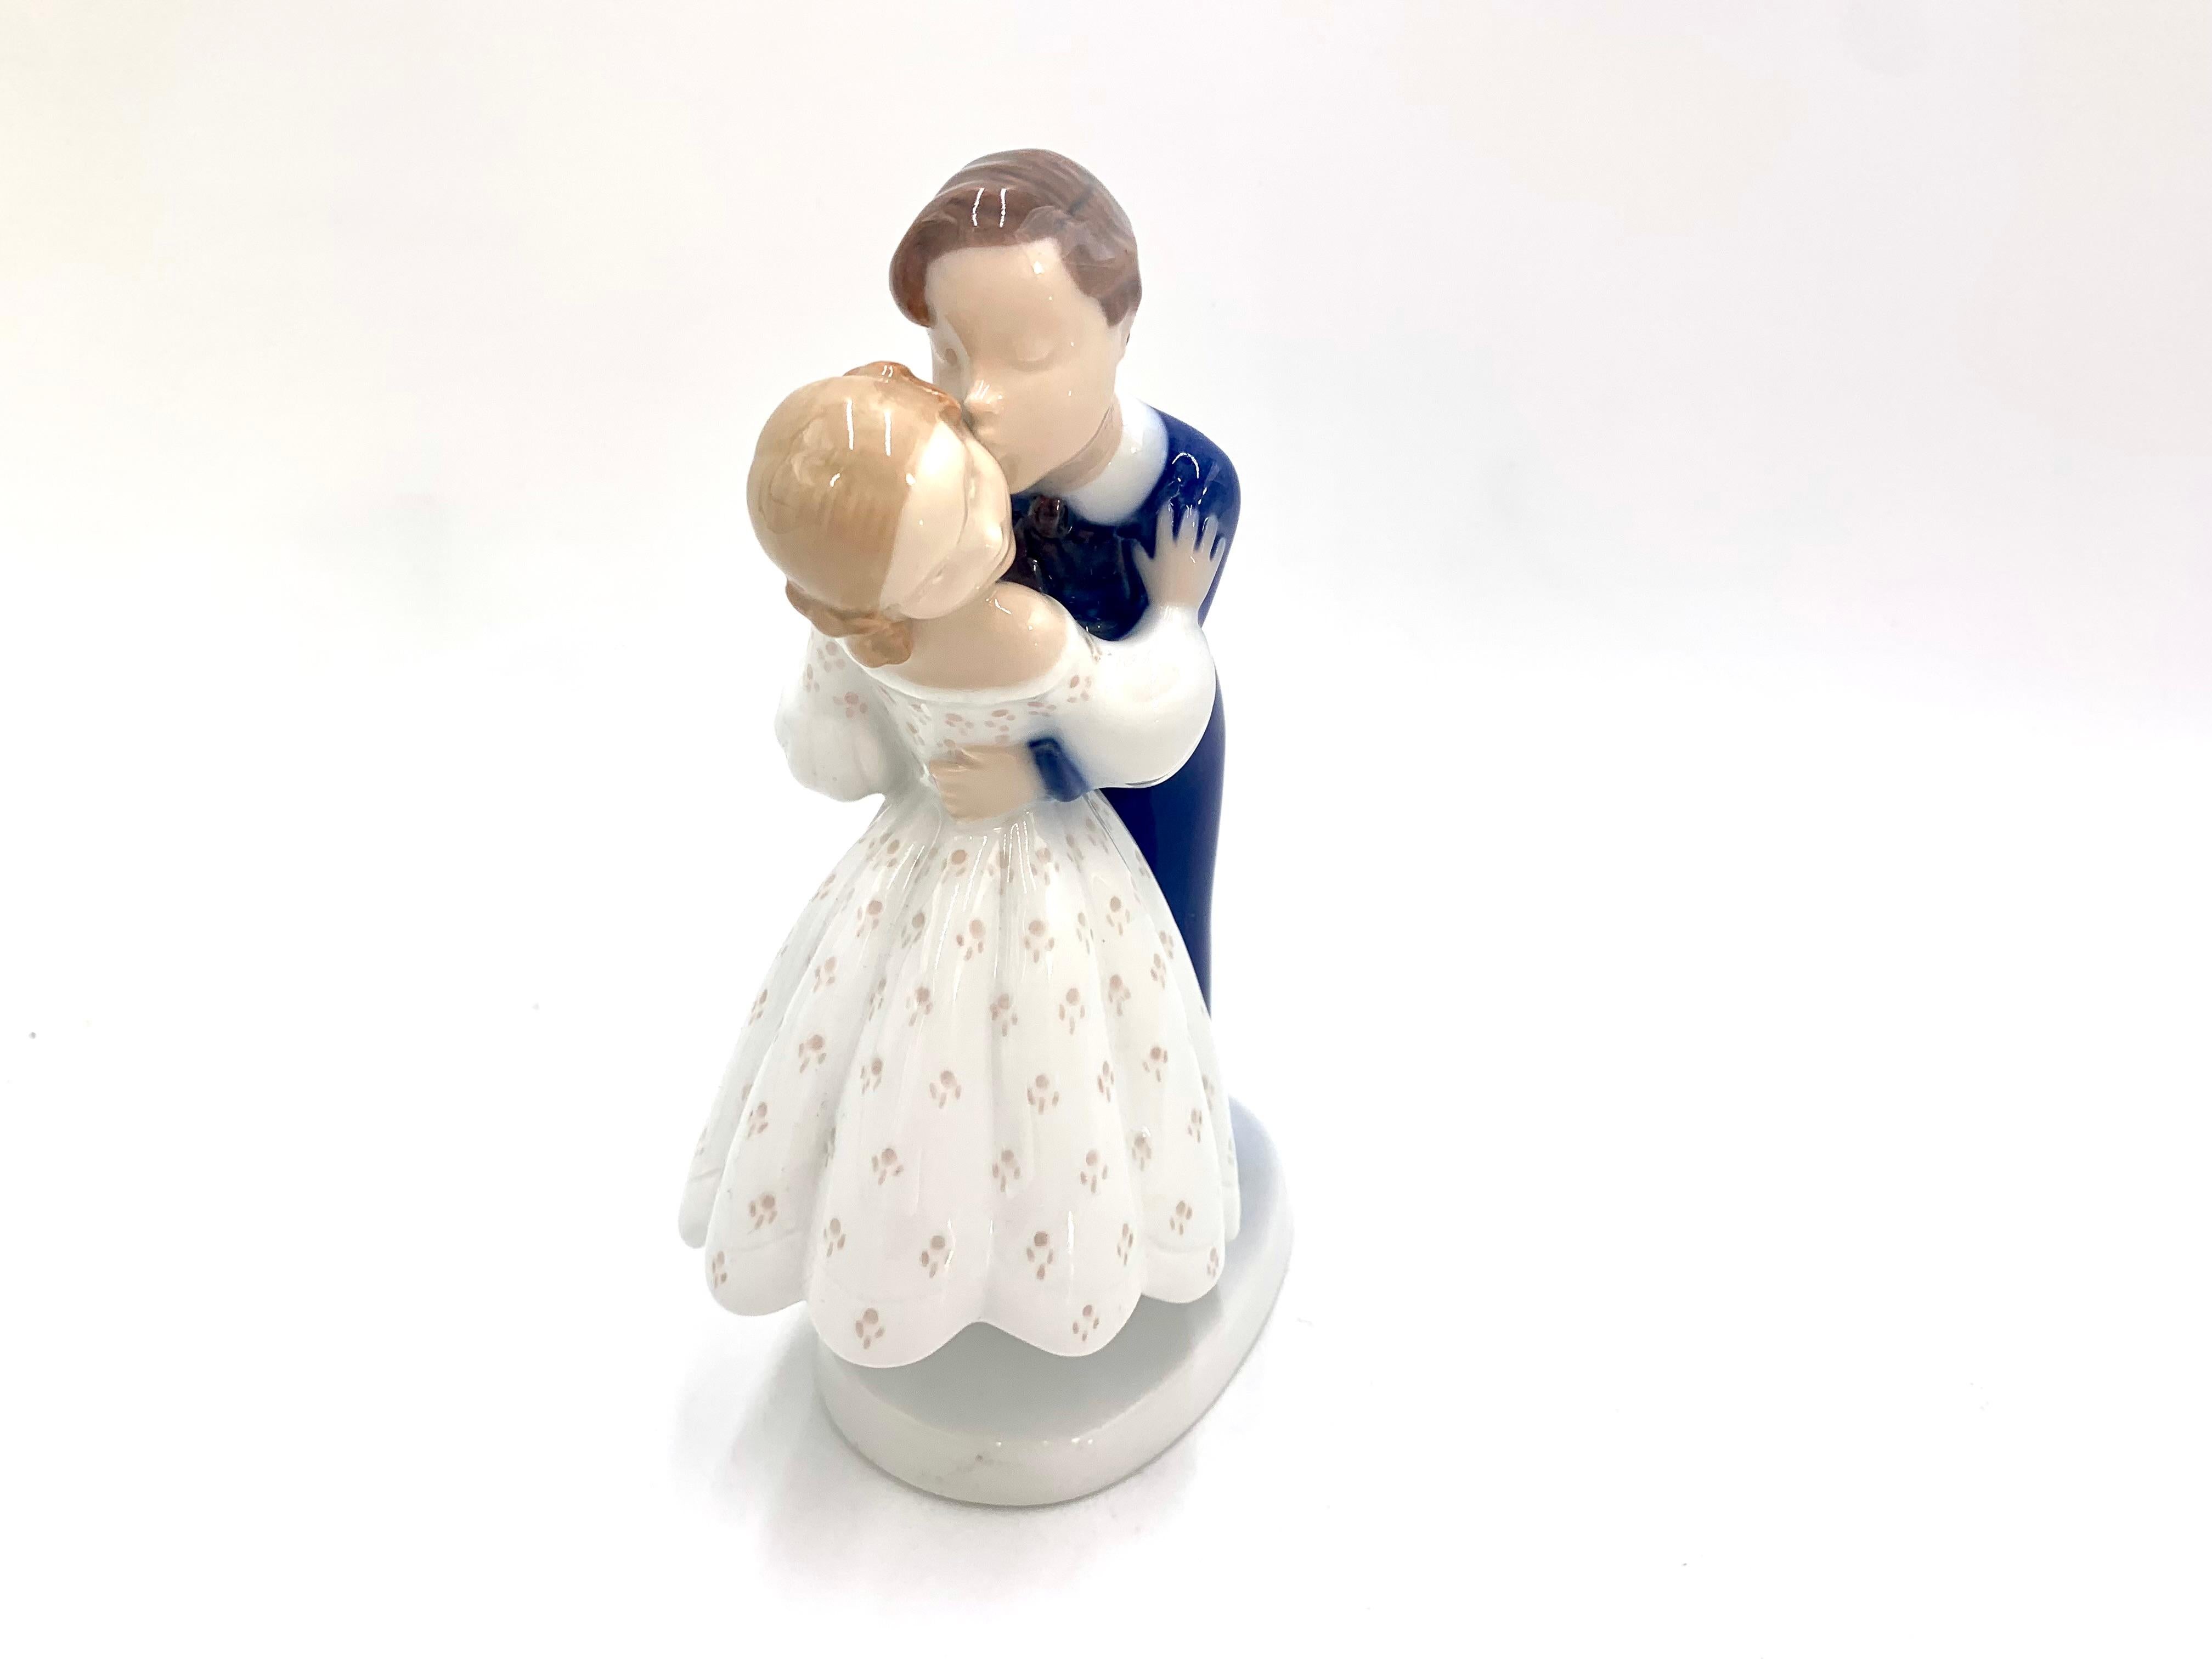 Porcelain figurine of a couple - a boy stealing a kiss from a girl

Made in Denmark by Bing & Grondahl

Manufactured in the 1960s / 1970s. XX century

Model number # 2162

Very good condition, no damage

Measures: height 19.5 cm width 11.5